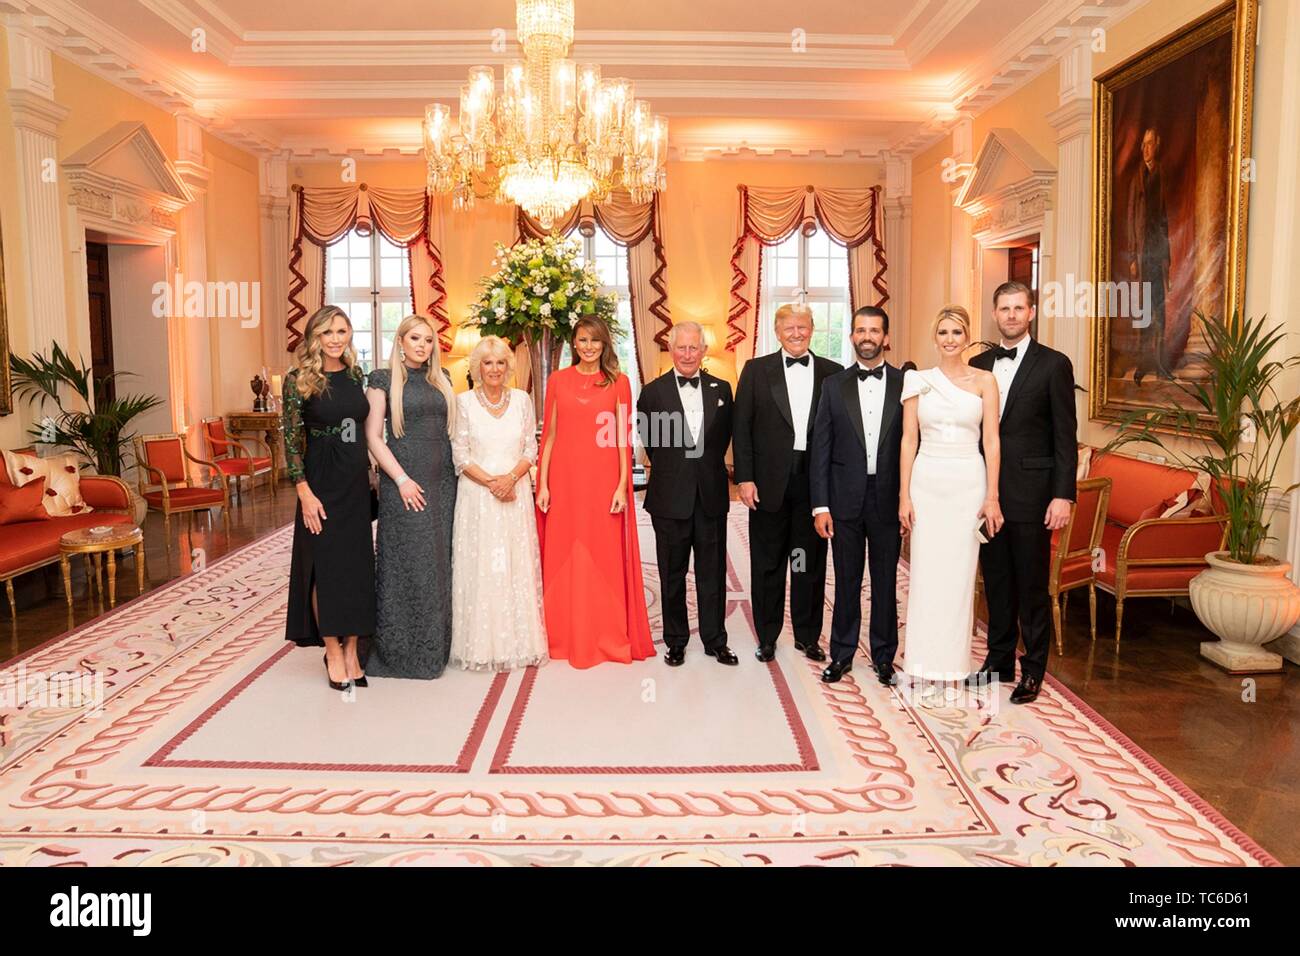 London, UK. 04th June, 2019. U.S President Donald Trump, and First Lady Melania Trump pose with Prince Charles and the Duchess of Cornwall at a gala hosted by the Trumps at Winfield House June 4, 2019 in London, England. Joining the from left, Lara Trump, Tiffany Trump, Donald Trump, Jr., Ivanka Trump and Eric Trump. Credit: Planetpix/Alamy Live News Stock Photo